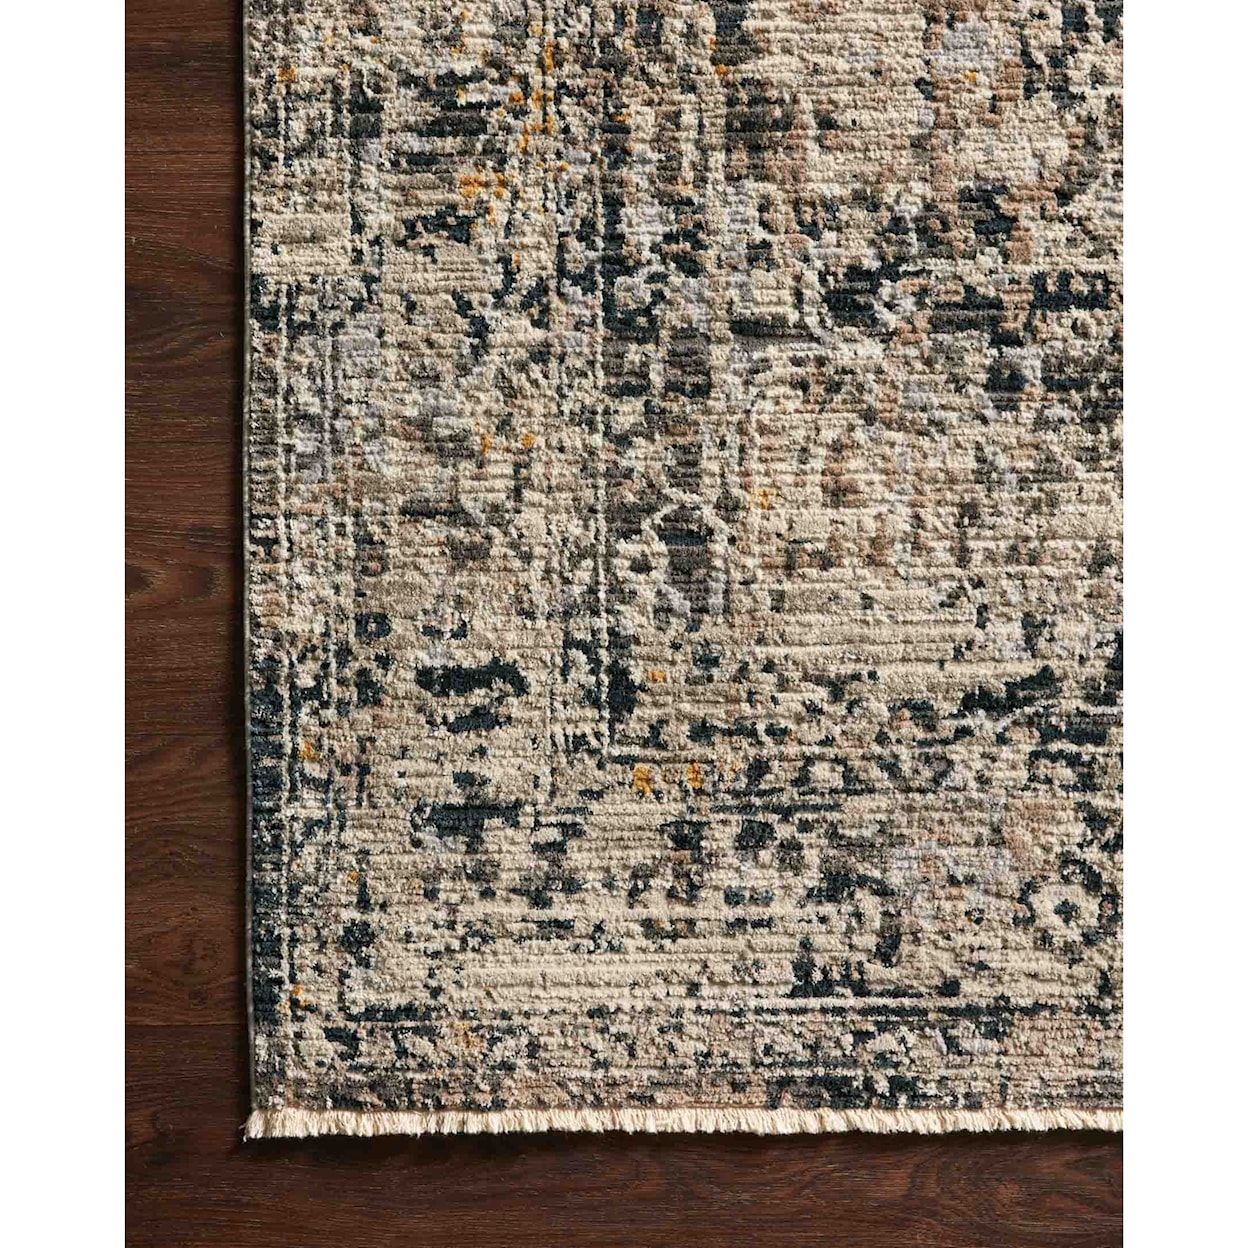 Reeds Rugs Leigh 2'7" x 7'8" Charcoal / Taupe Rug